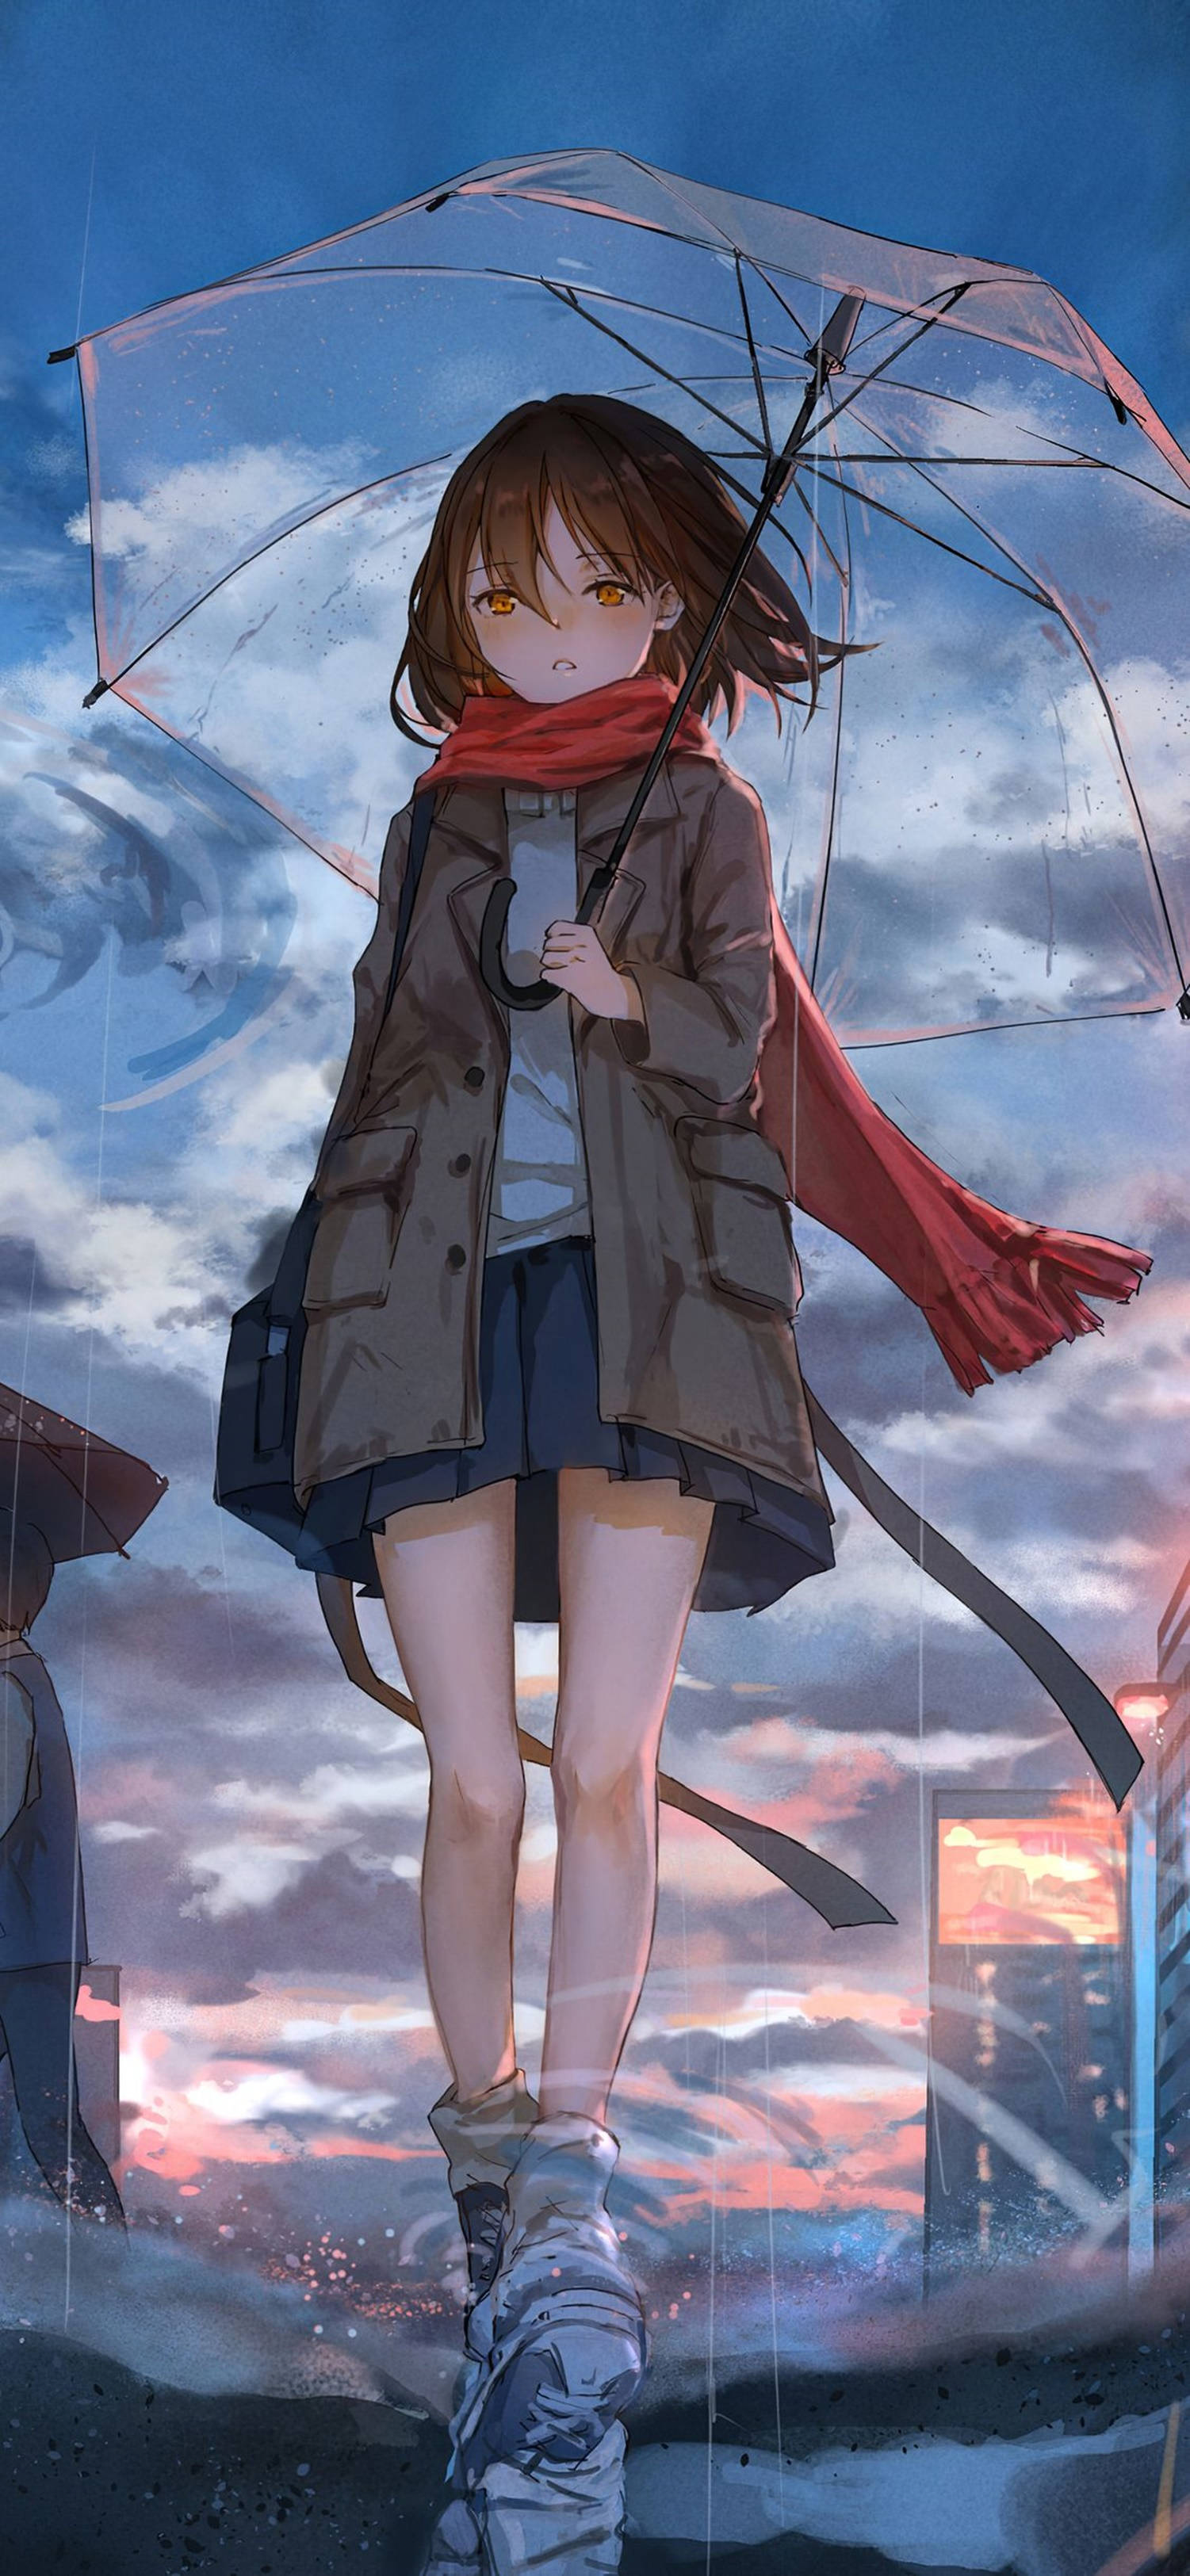 4k Anime Iphone Girl With Red Scarf